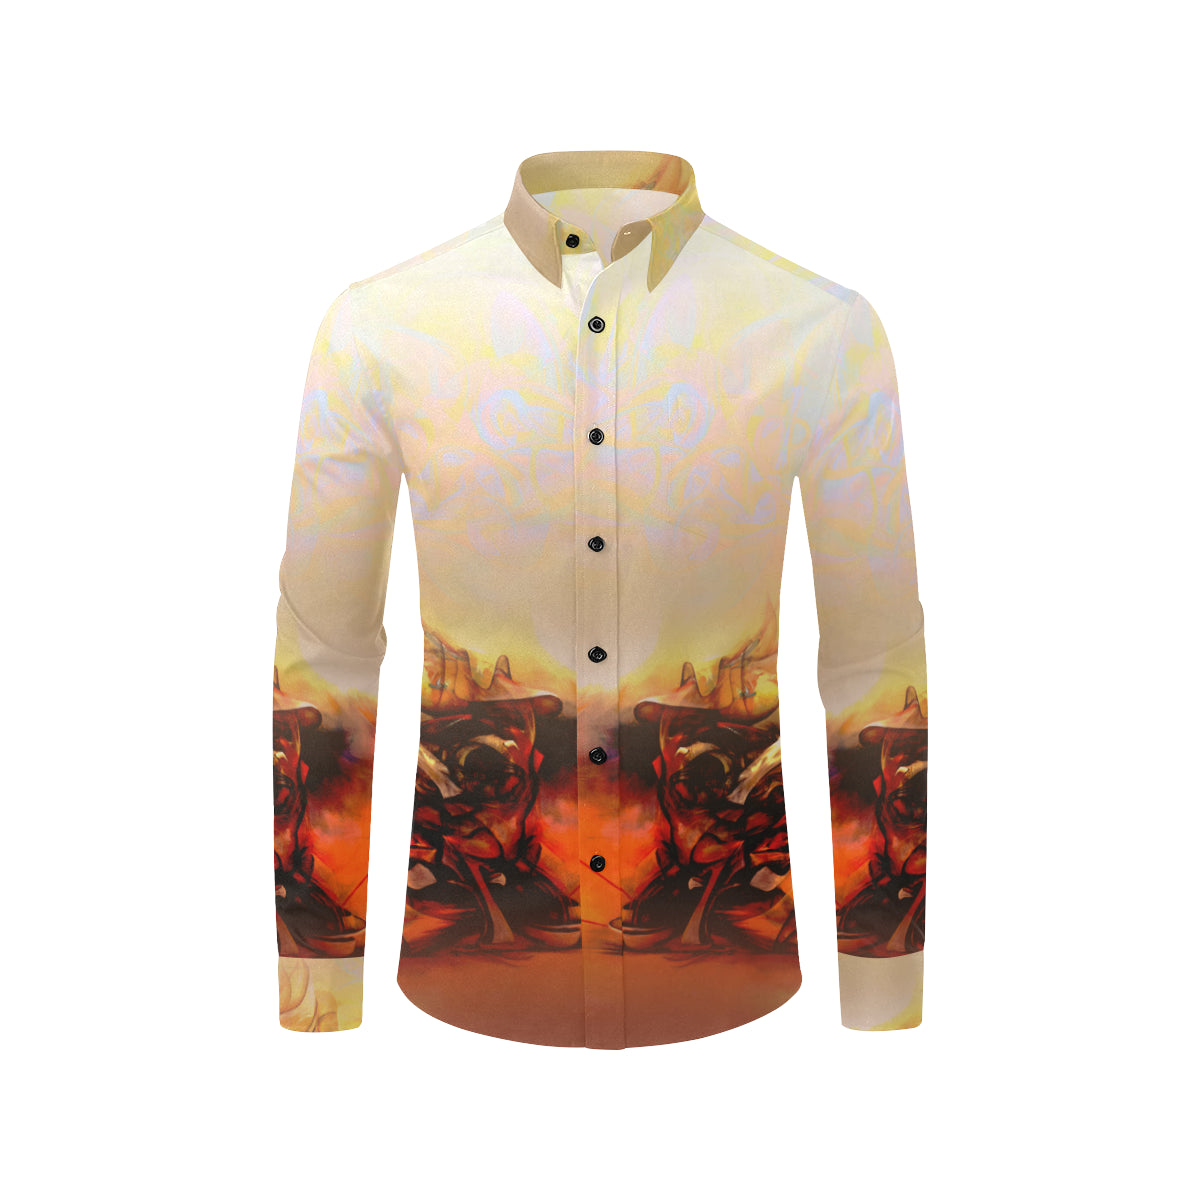 Chemise manches longues "Vayansitude"